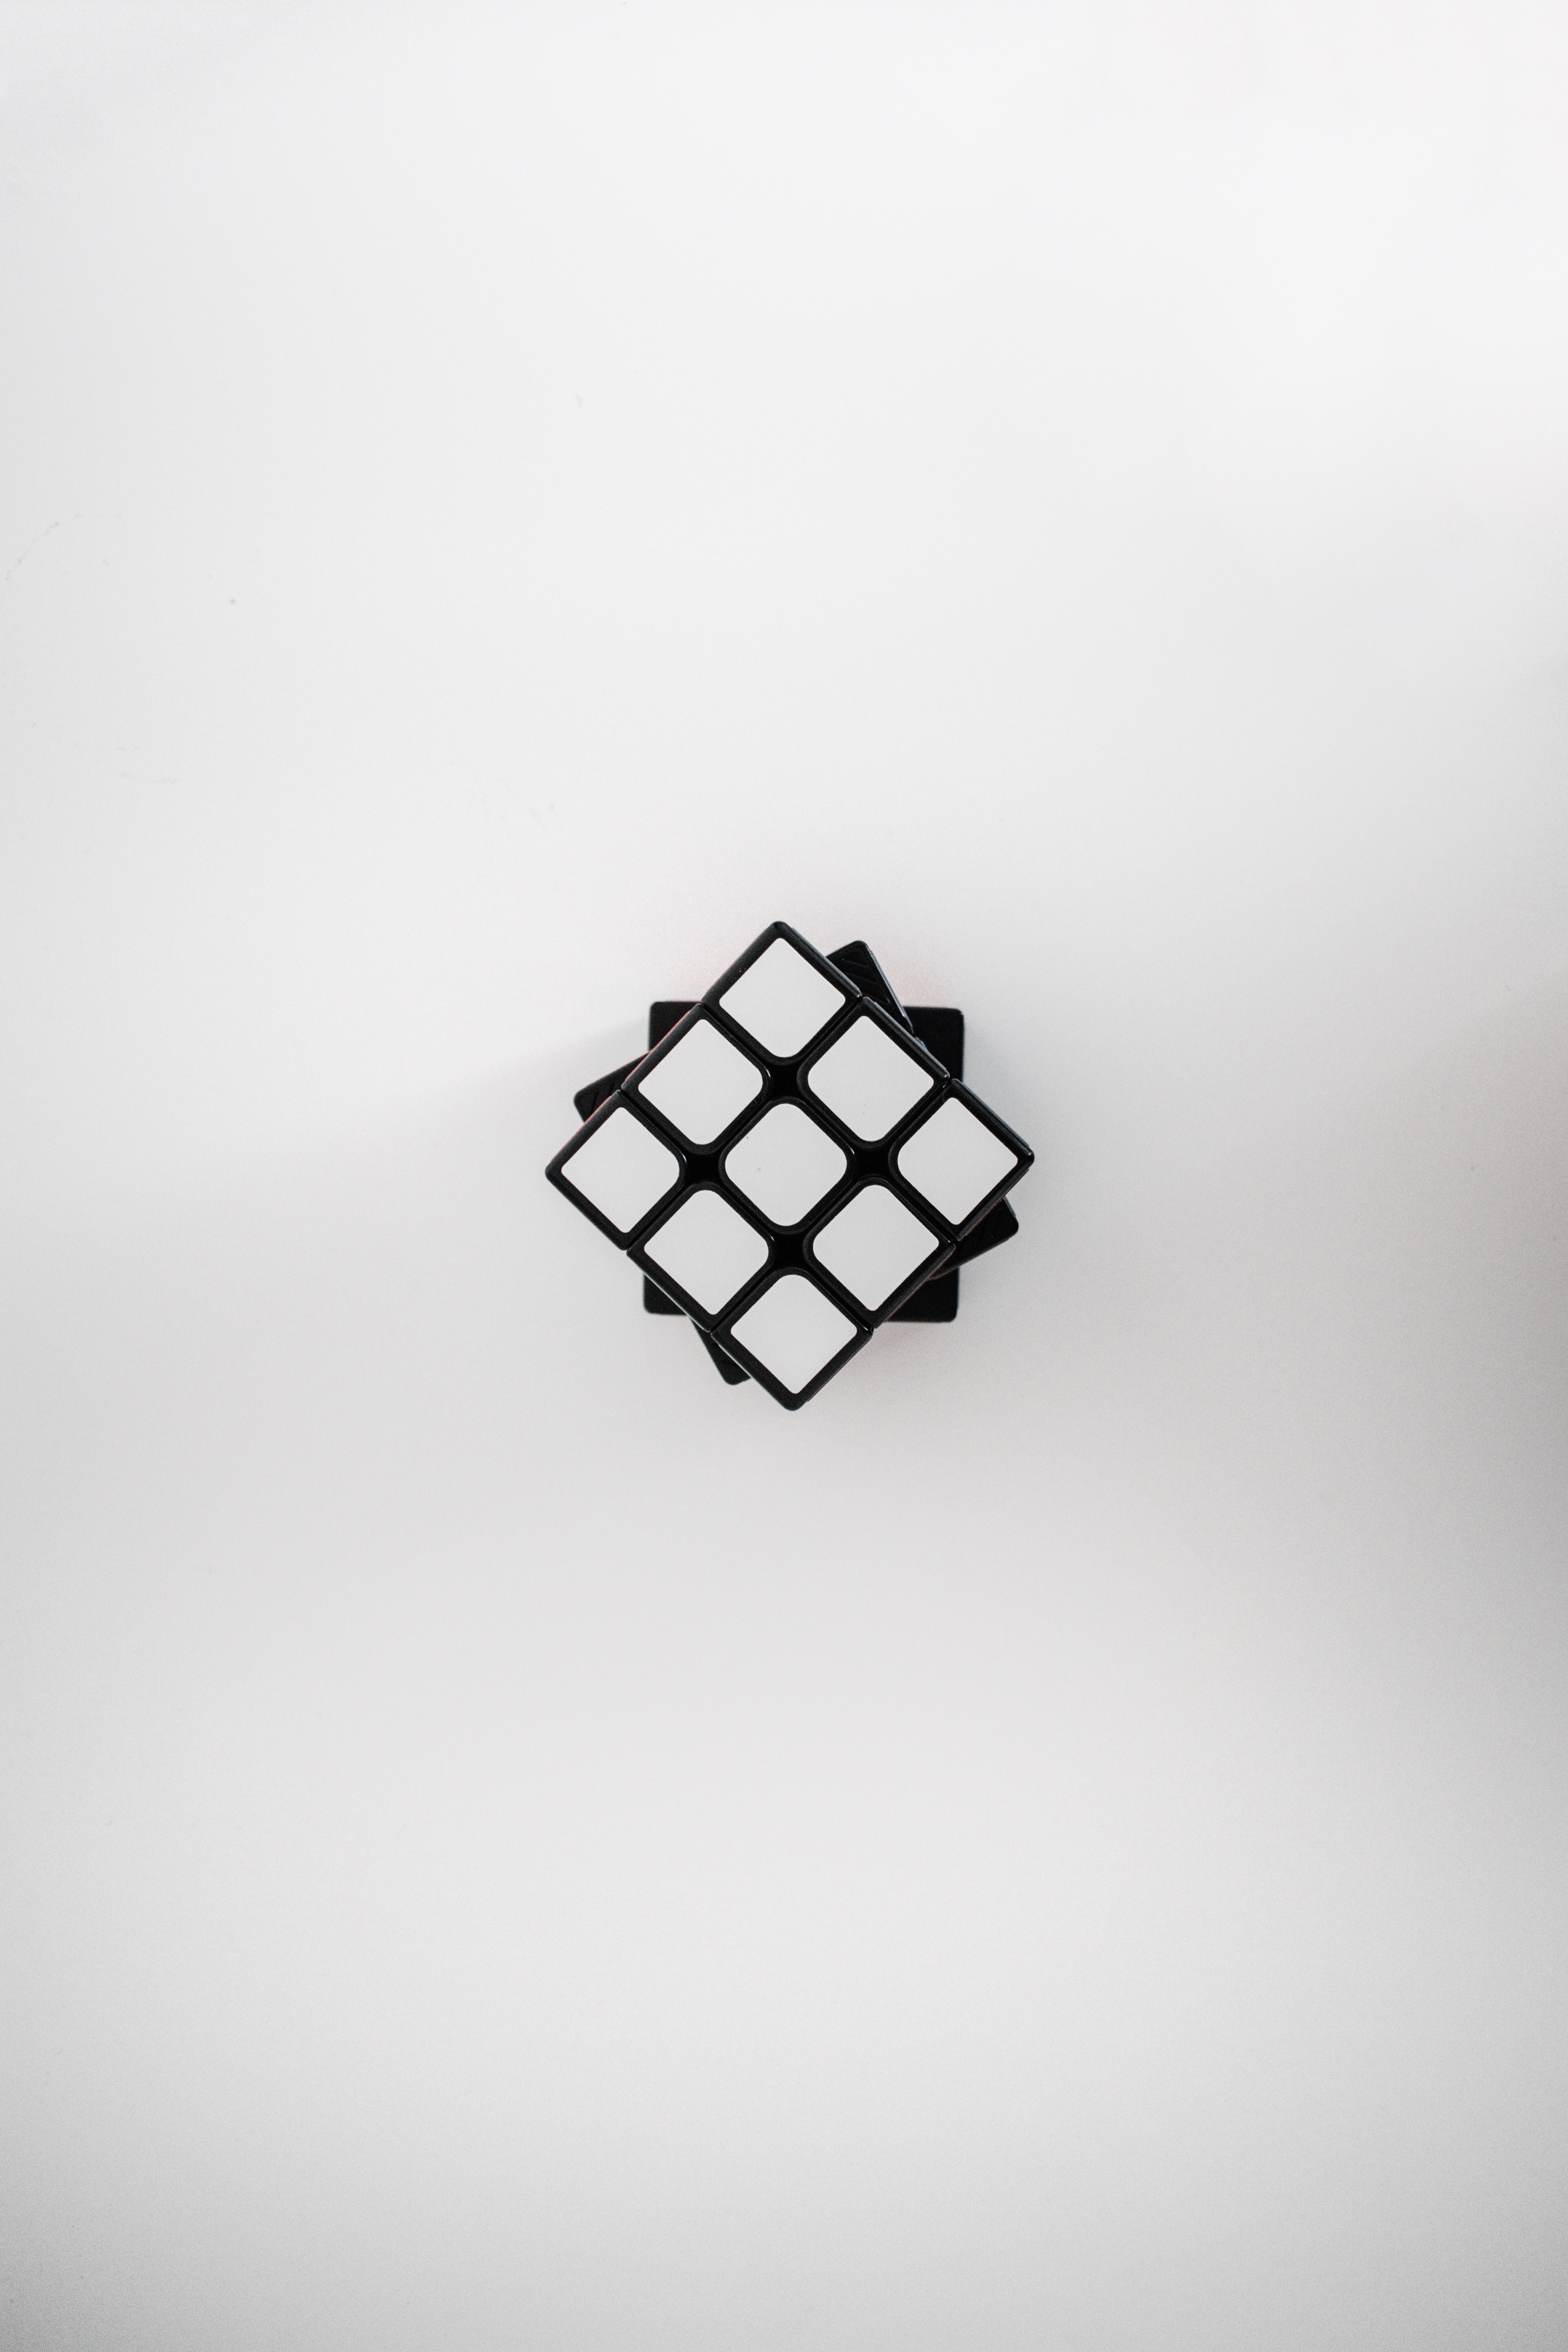 rubik's cube, cube, miscellanea, white, view from above, miscellaneous cellphone